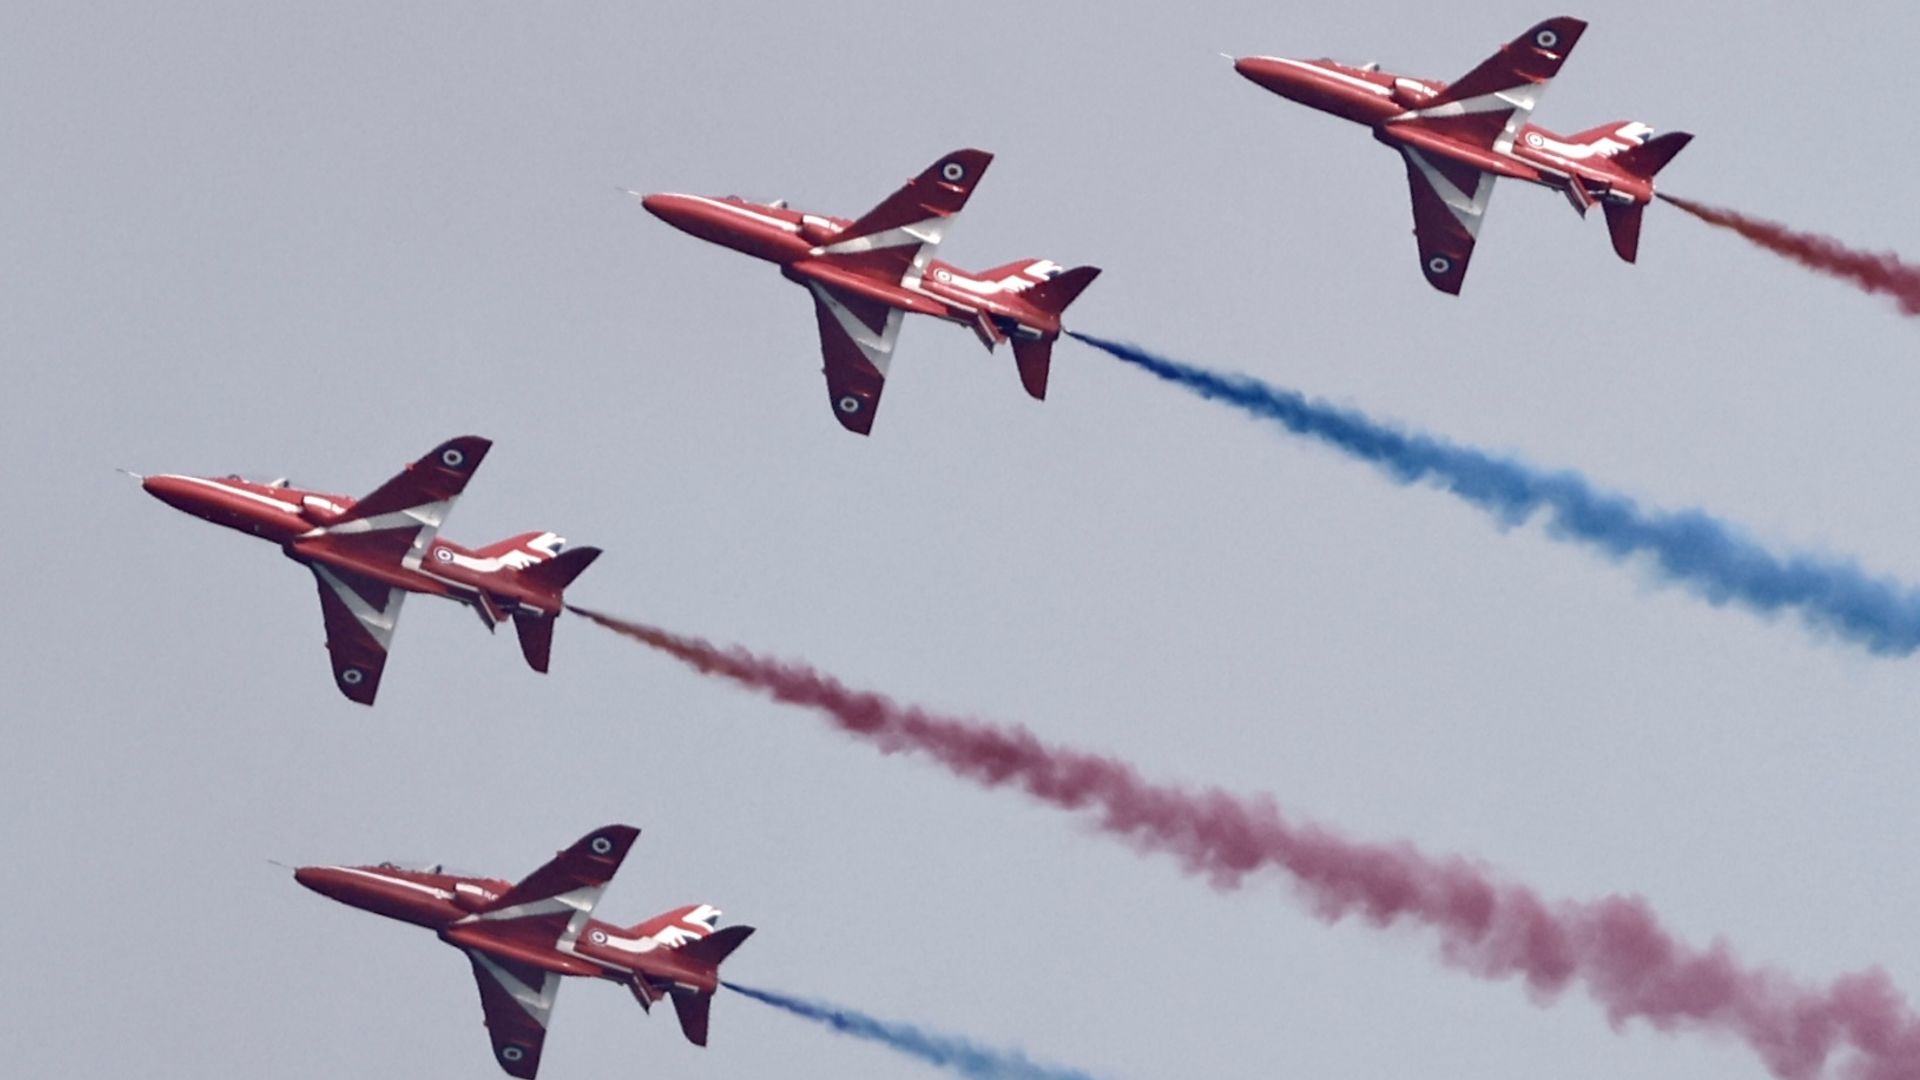 Four red arrows shoot across the sky with blue and red smoke coming from their tails